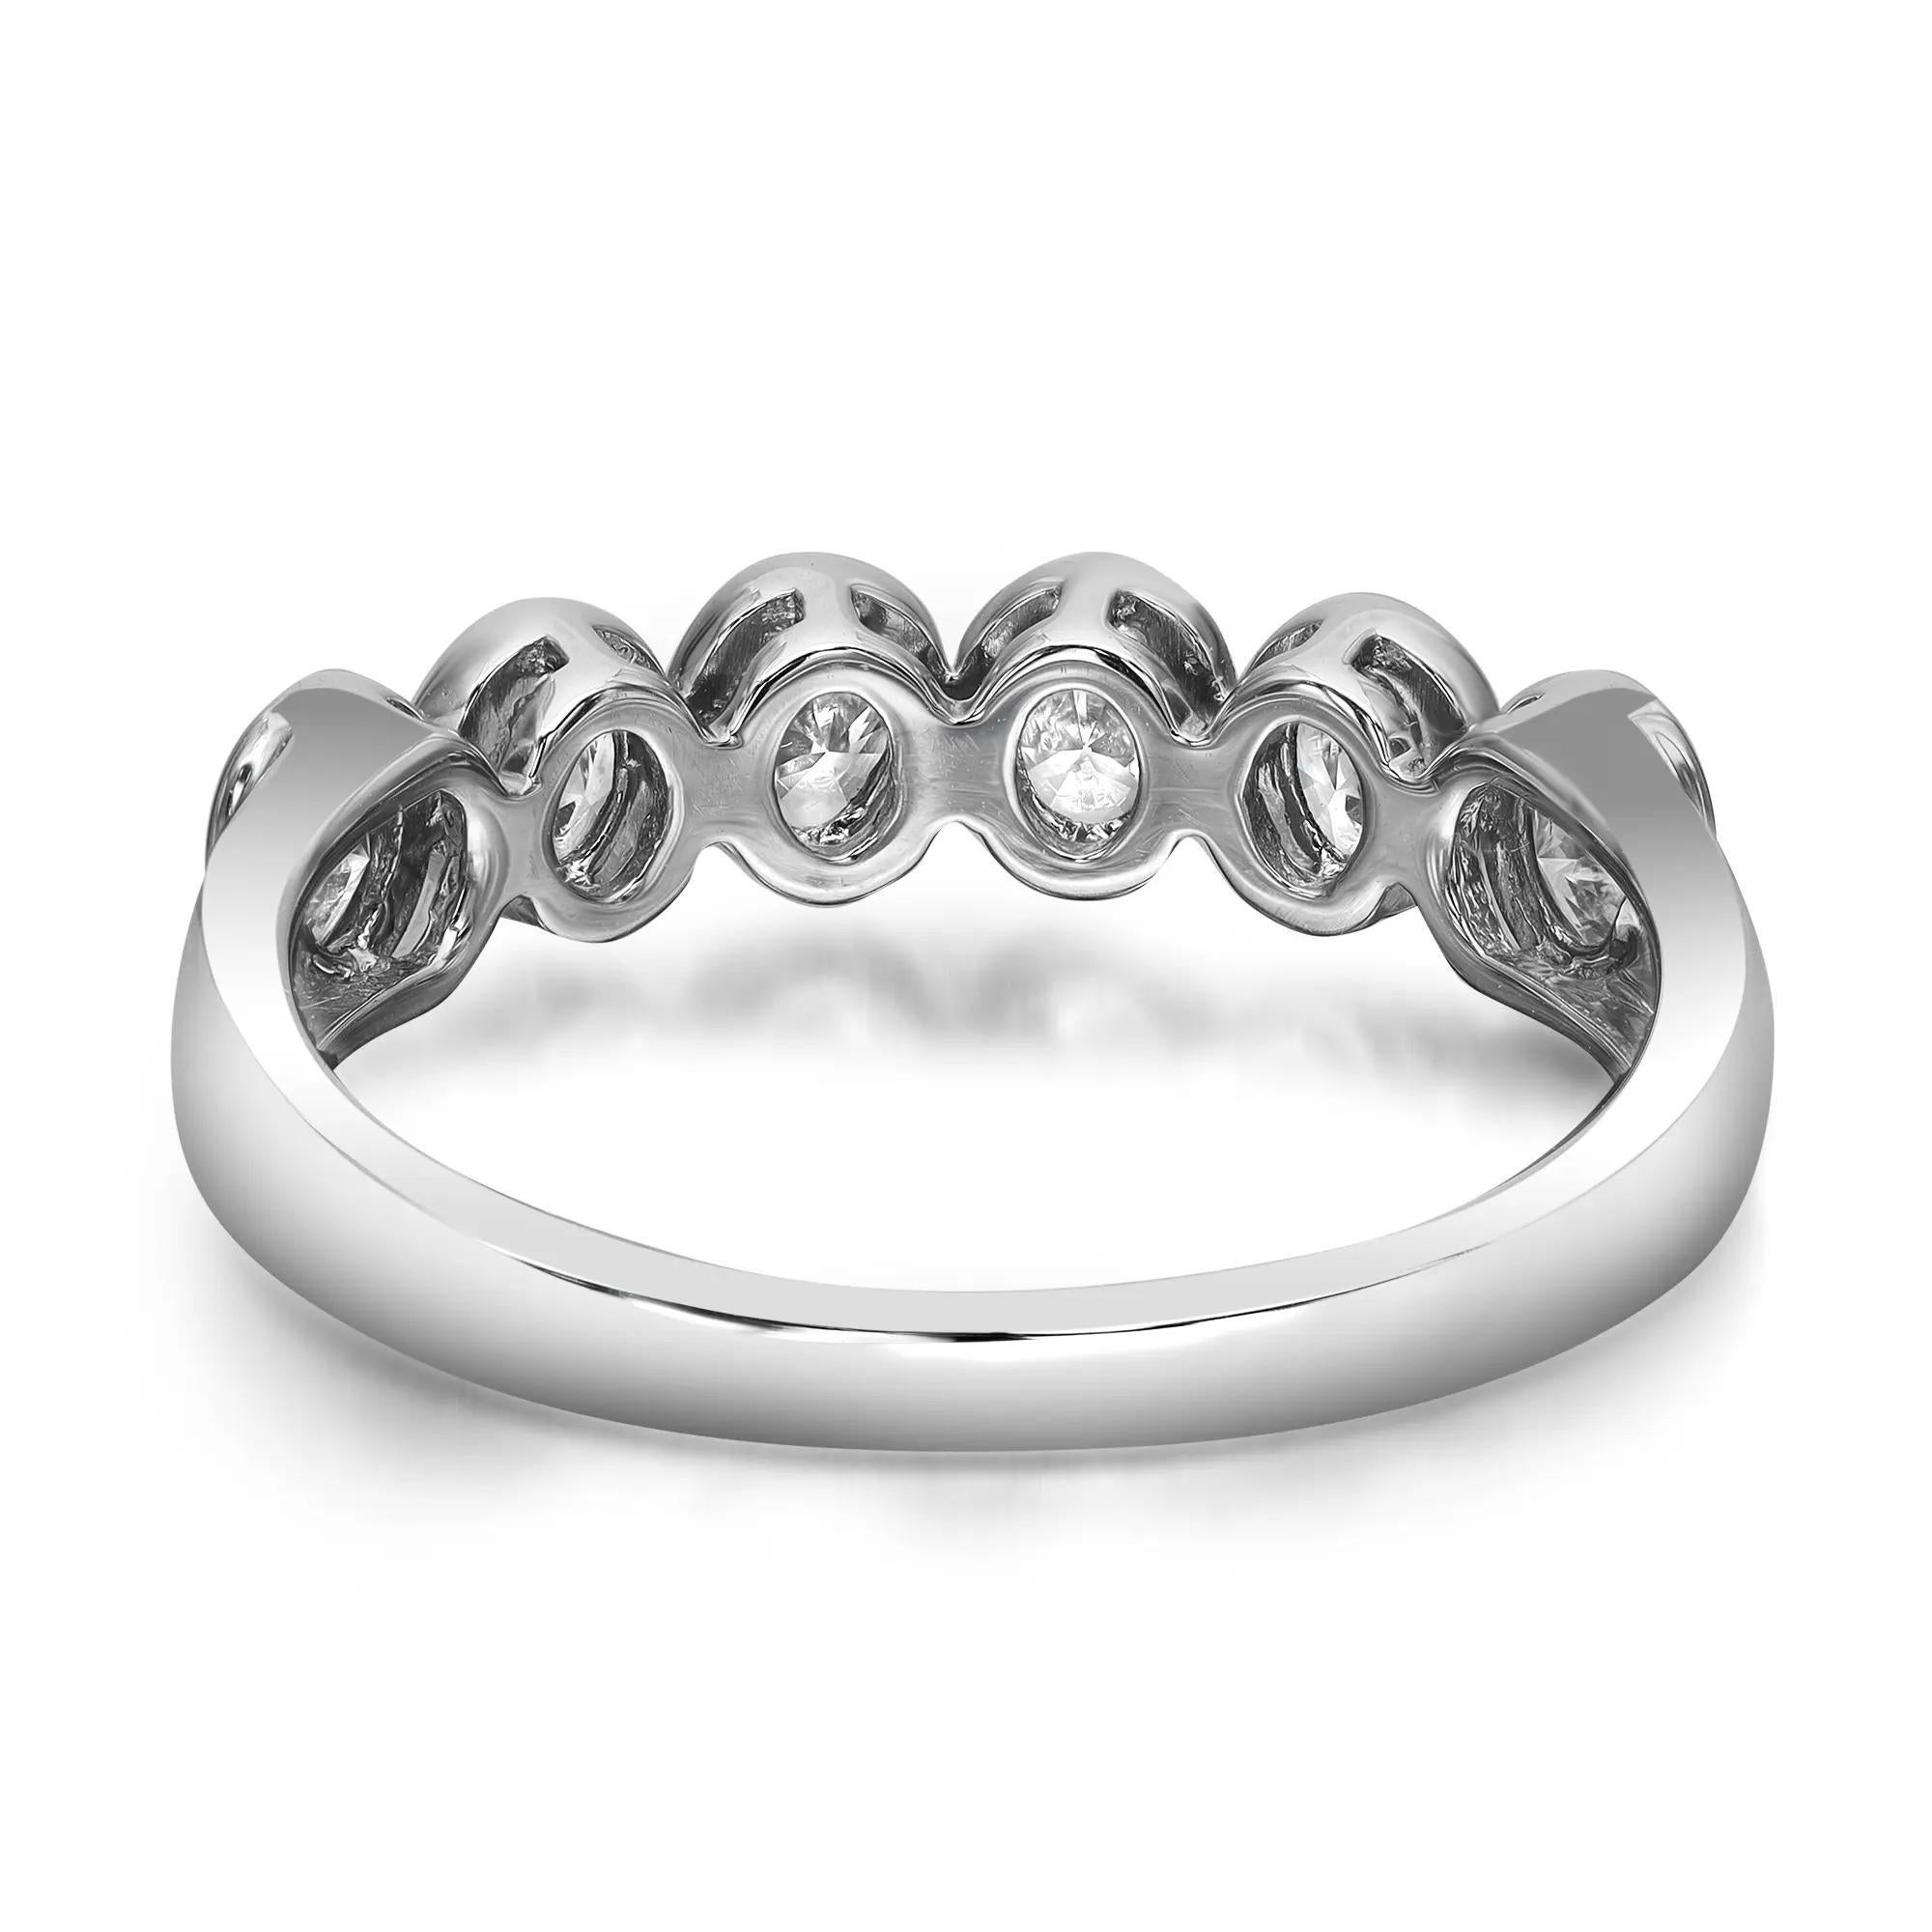 0.85cttw Bezel Set Oval Cut Diamond Eternity Band Ring 18k White Gold Size 6.5 In New Condition For Sale In New York, NY